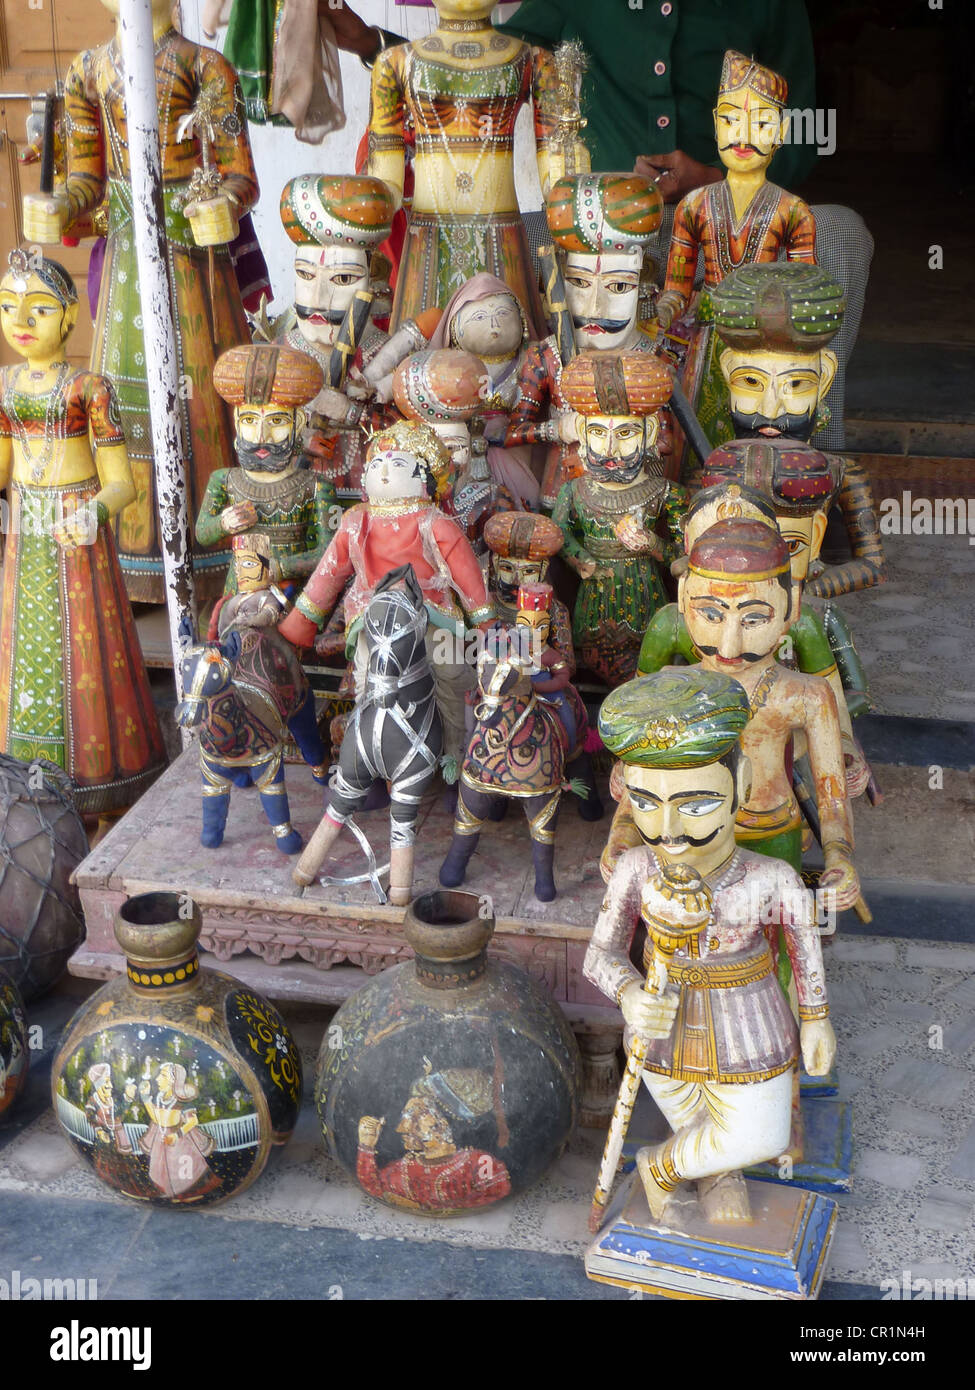 Puppets and marionettes of Rajput princes in Udaipur marketplace, Rajasthan, India, Asia Stock Photo